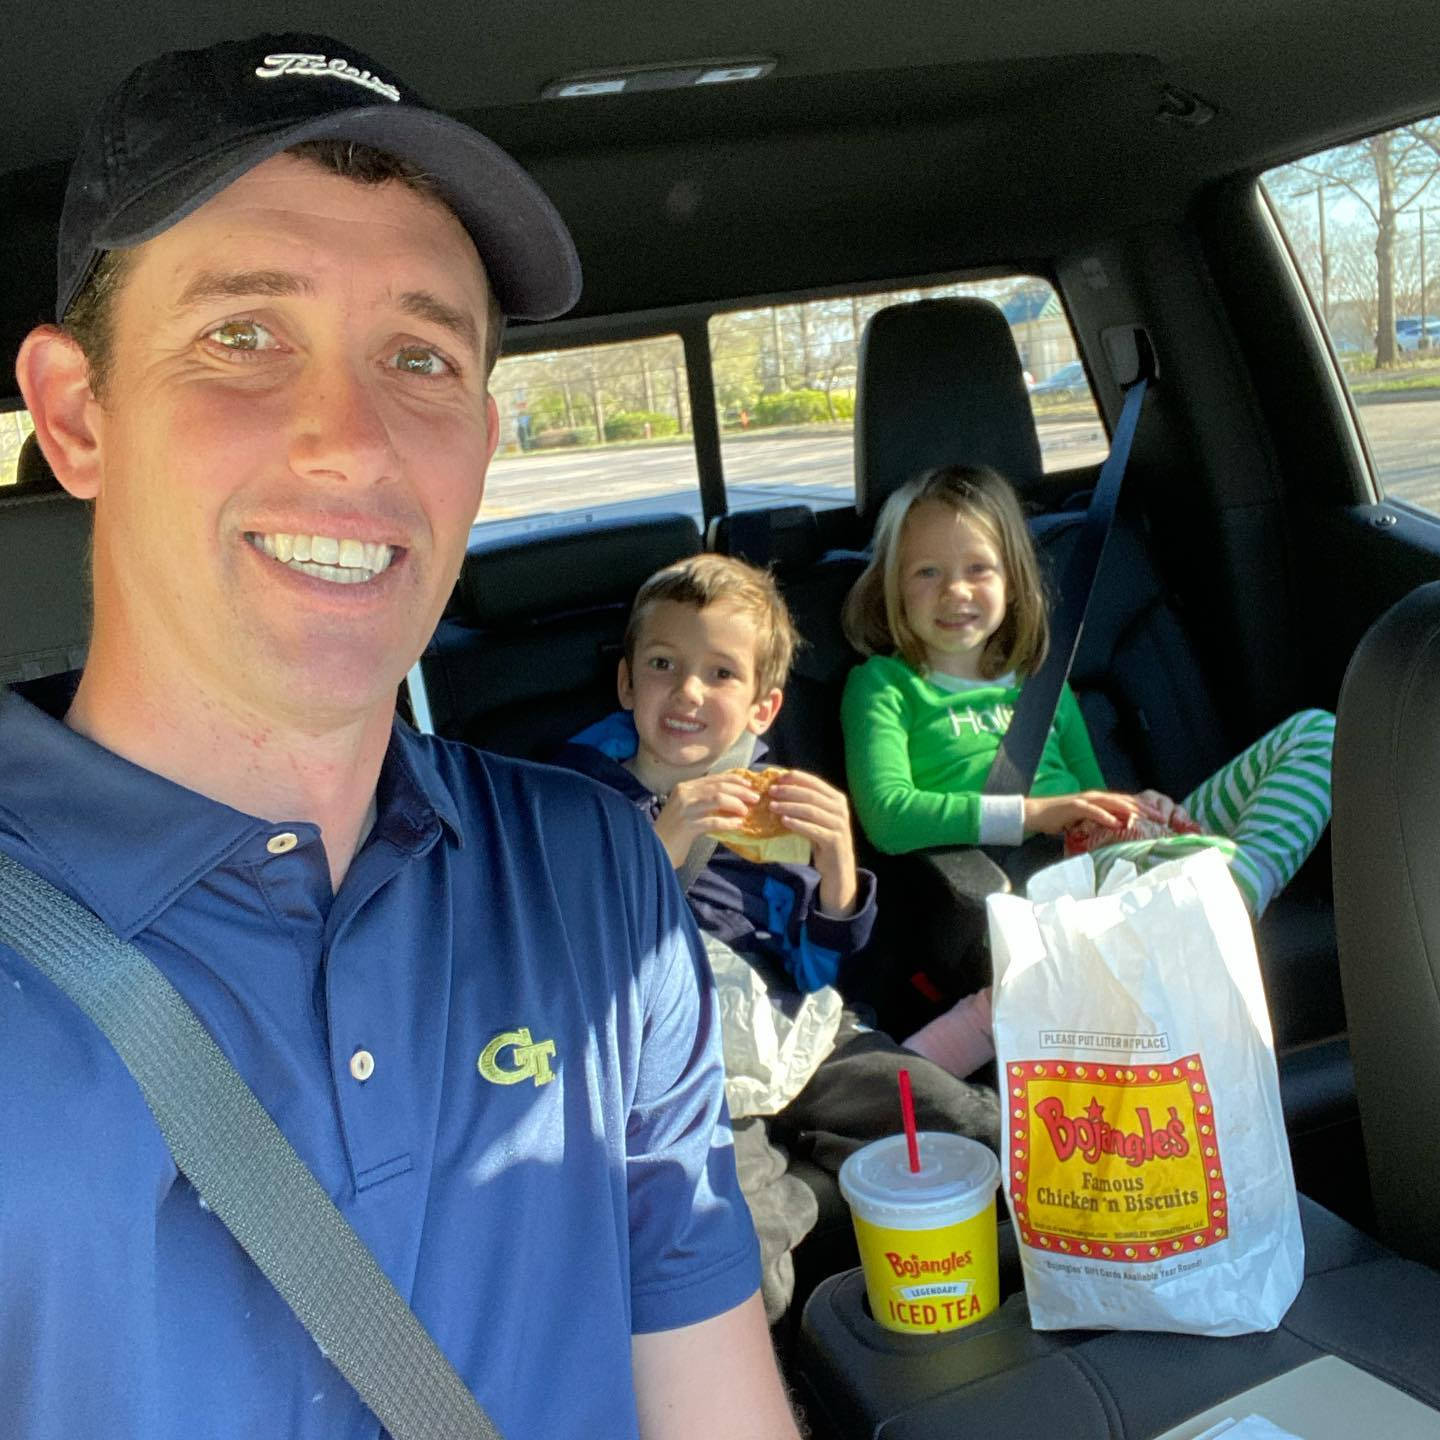 Chesson Hadley With Kids In Car Wallpaper